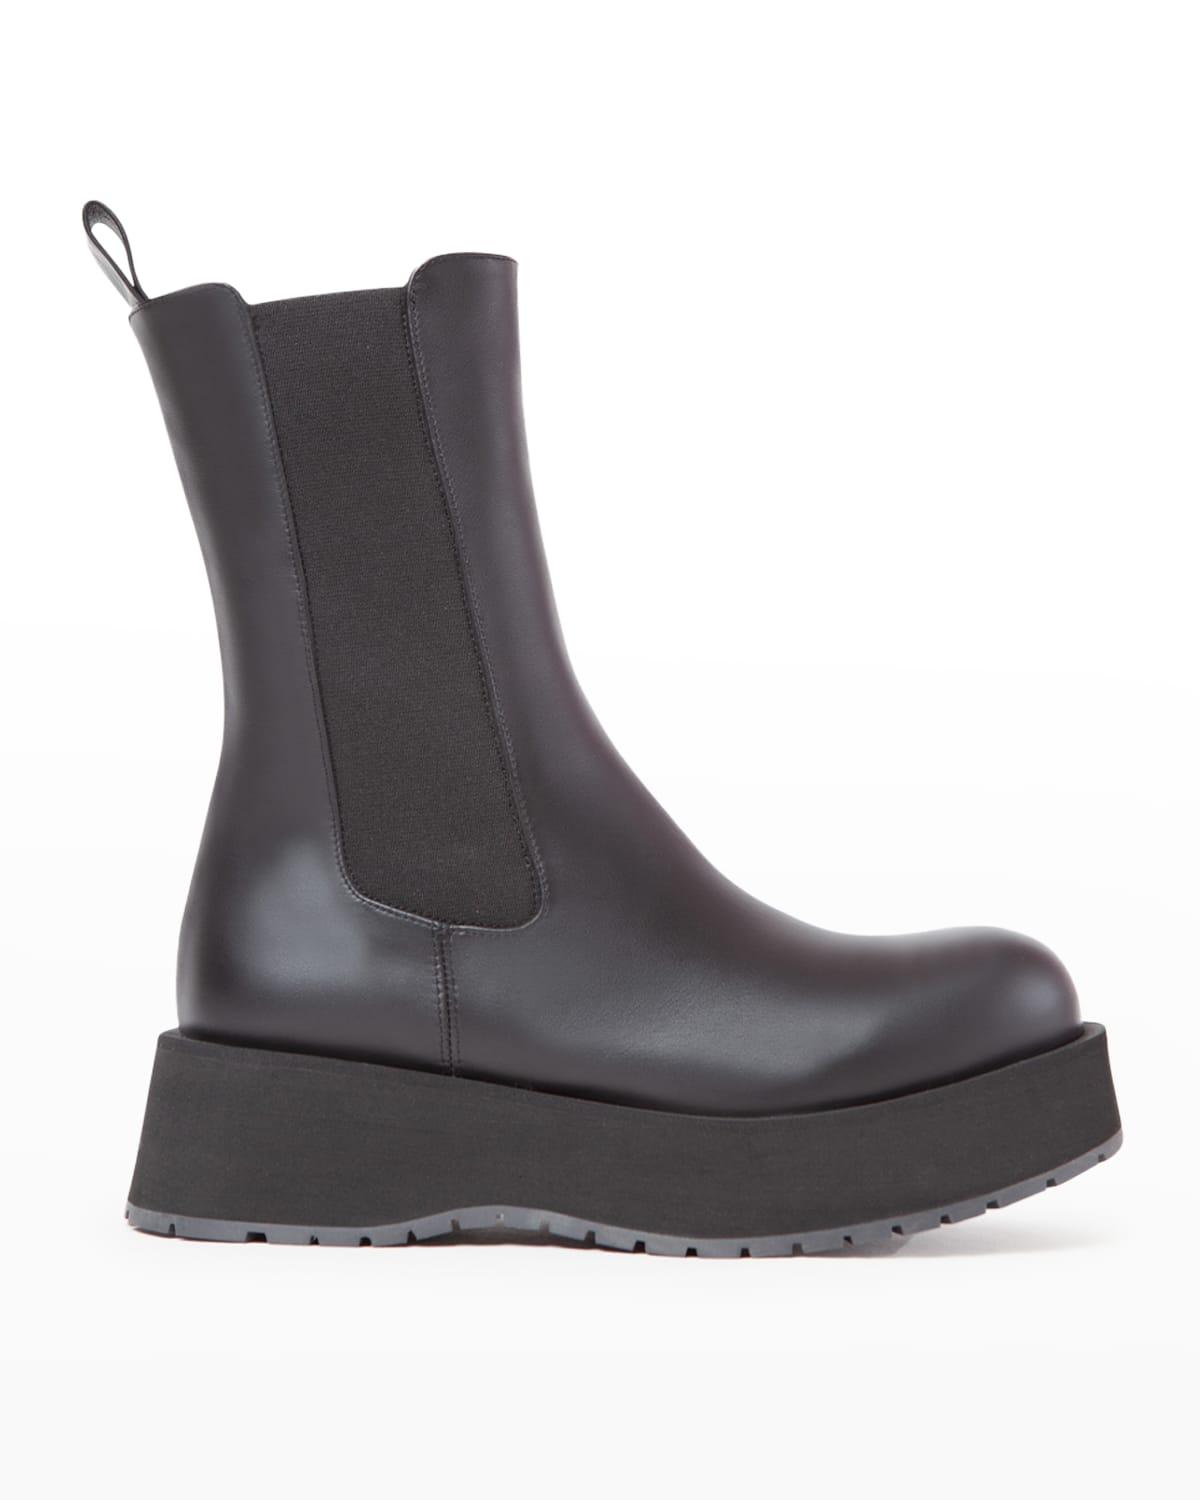 Paloma Barceló Aster Iris Leather Chelsea Boots in Black | Lyst